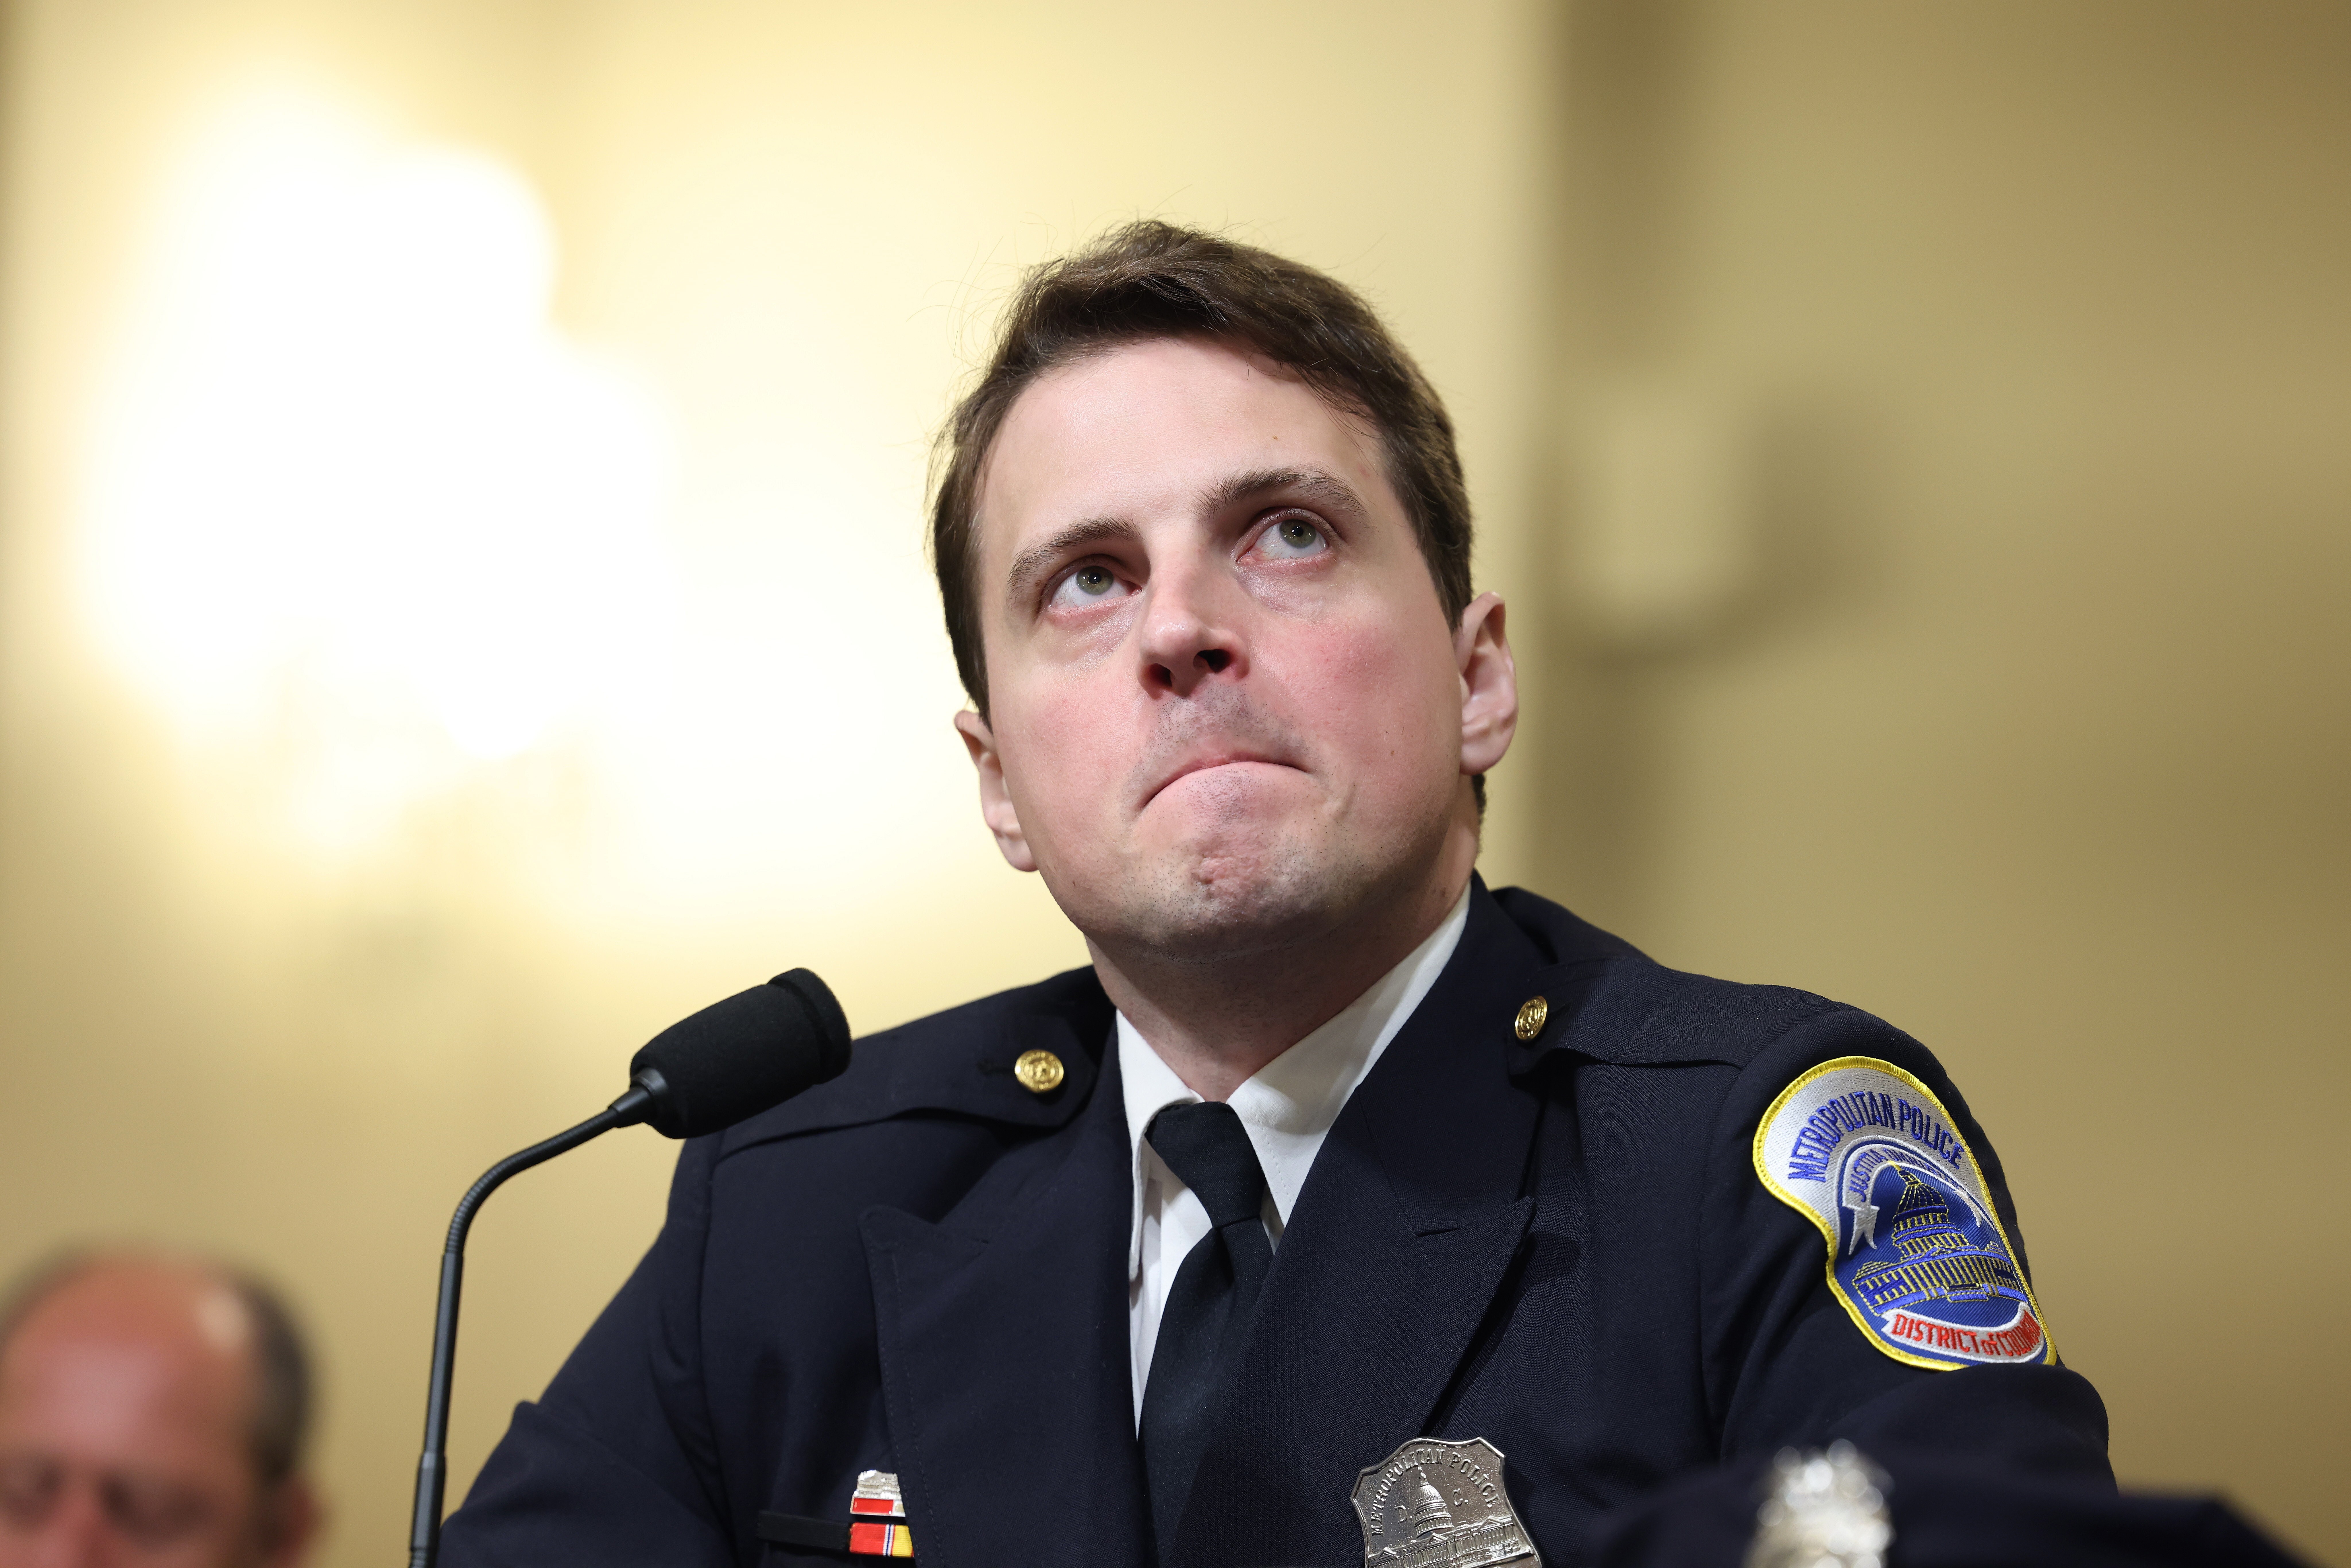 Metropolitan Police Department Officer Daniel Hodges at a Select Committee hearing in Washington on Tuesday. Photo: EPA / Bloomberg